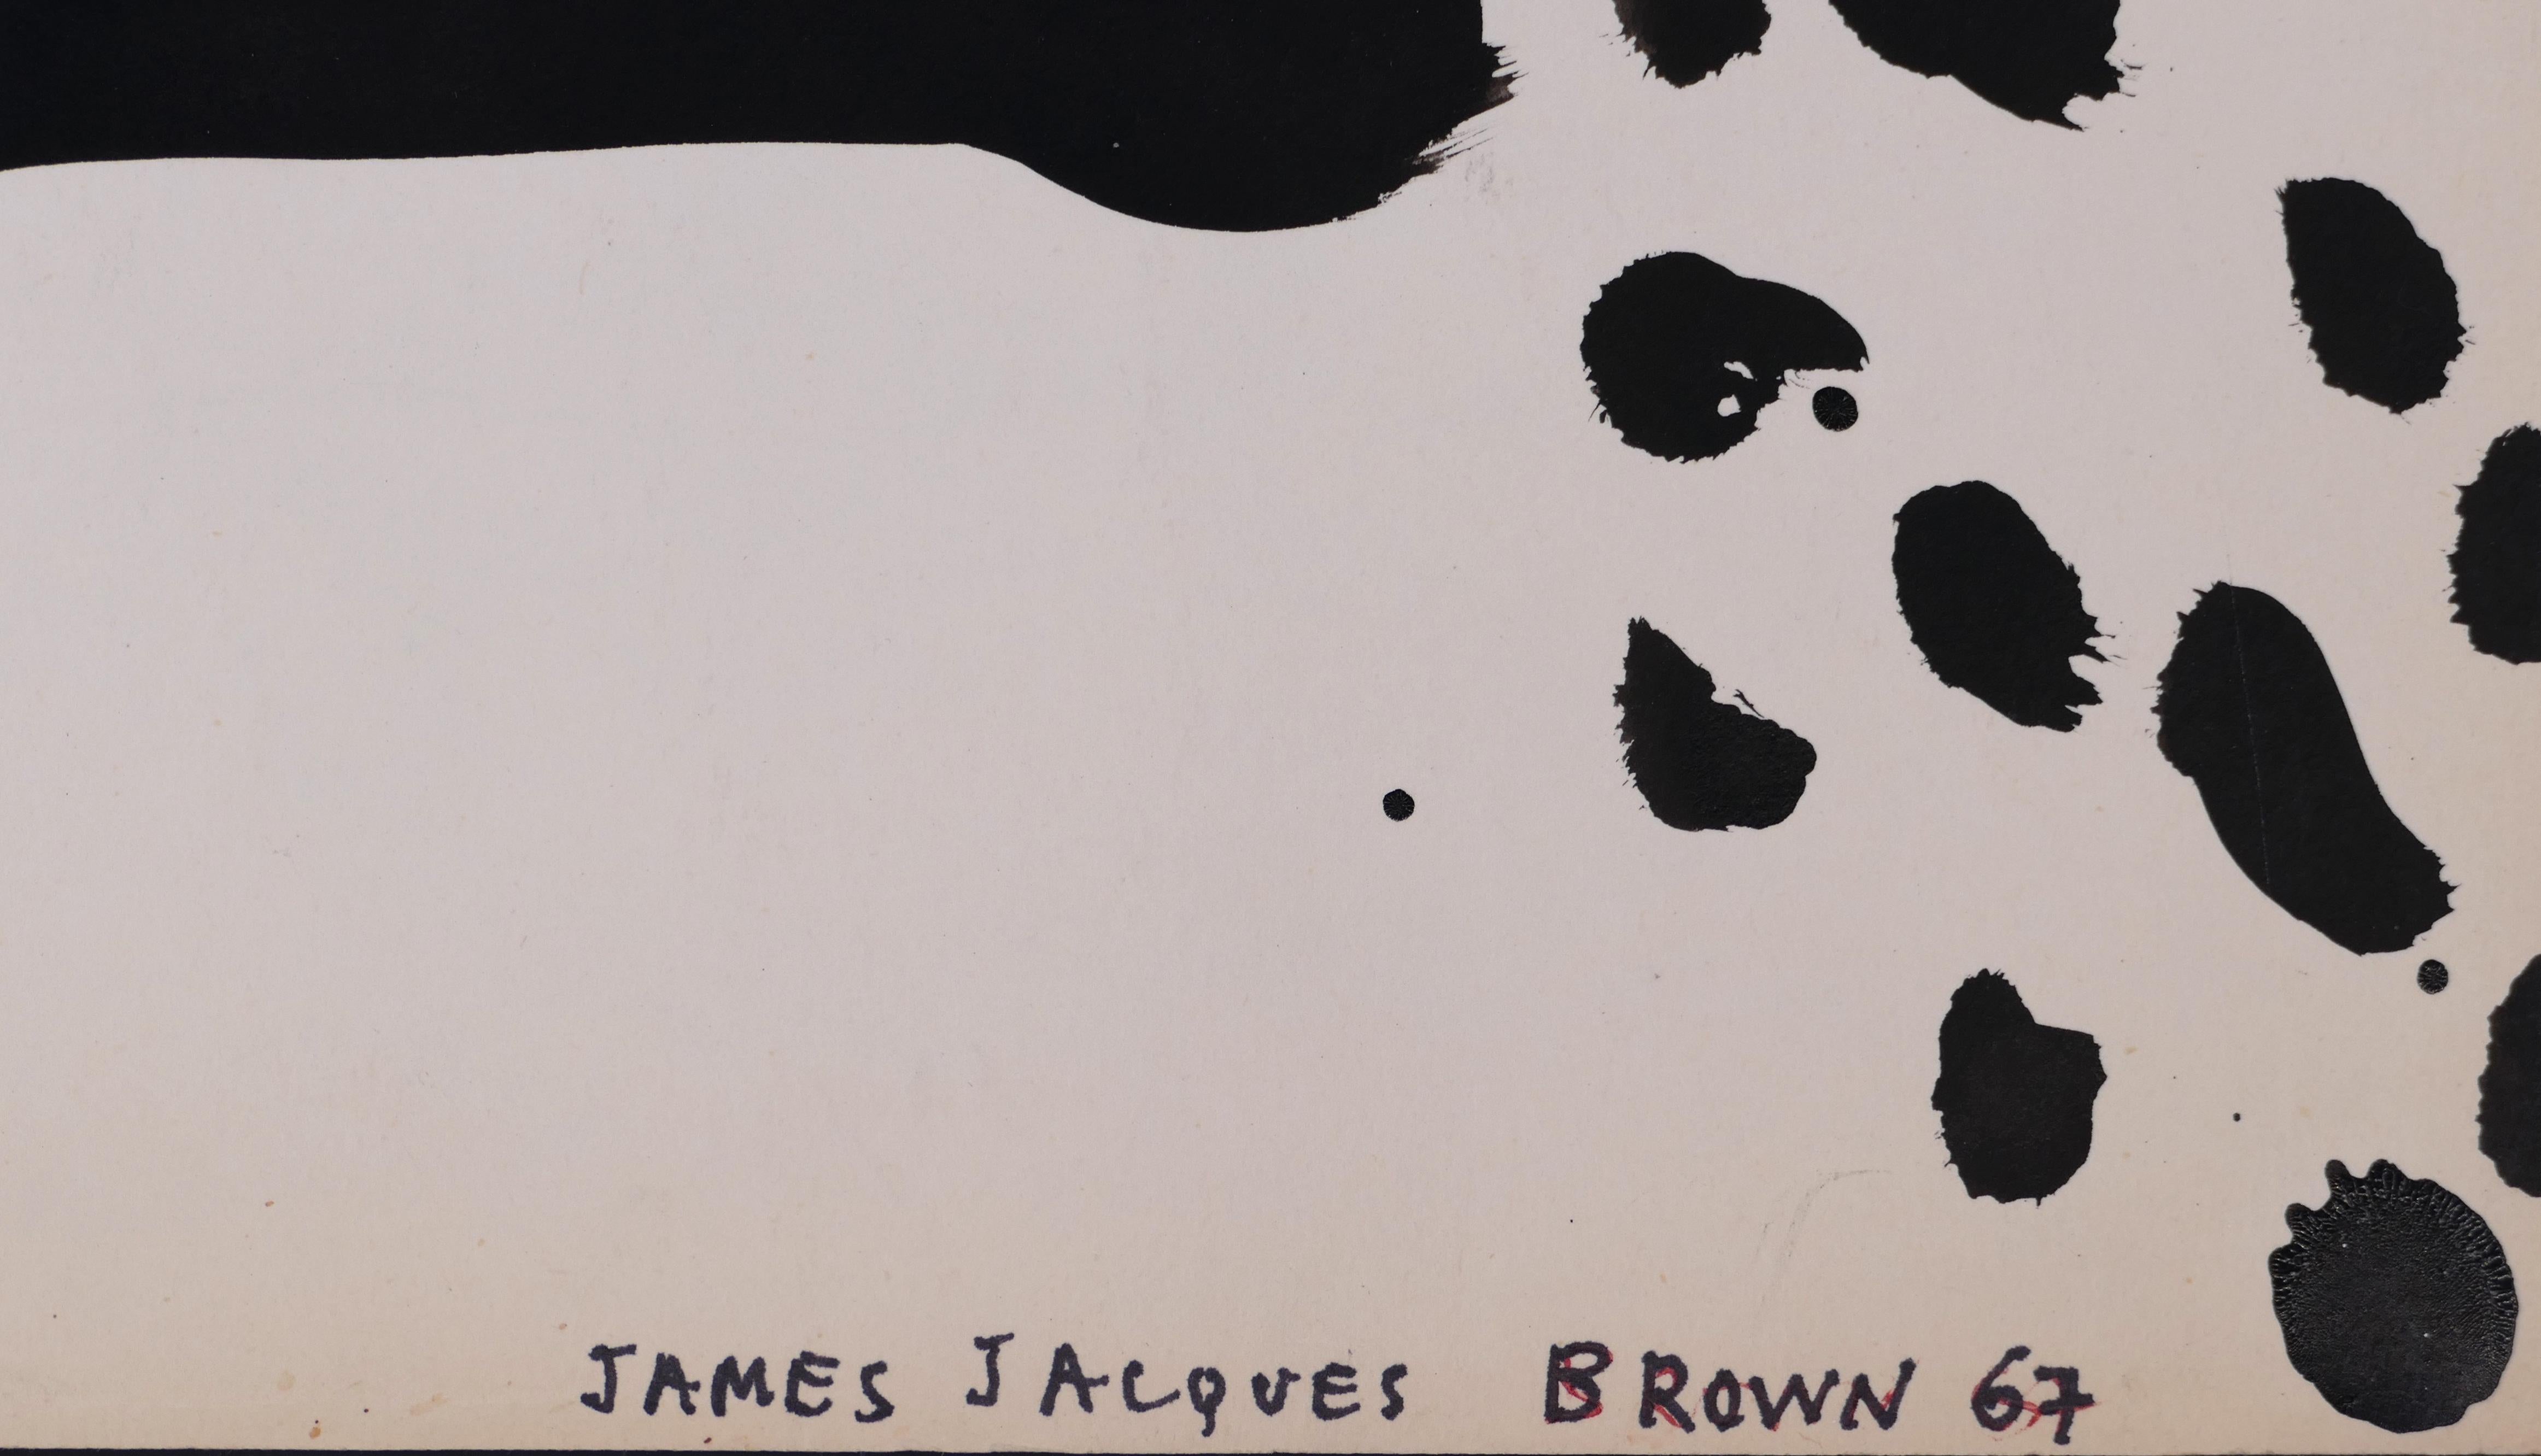 Abstract Noir - Original Tempera on Paper by J.-J. town - 1967 - Painting by James-Jacques Brown